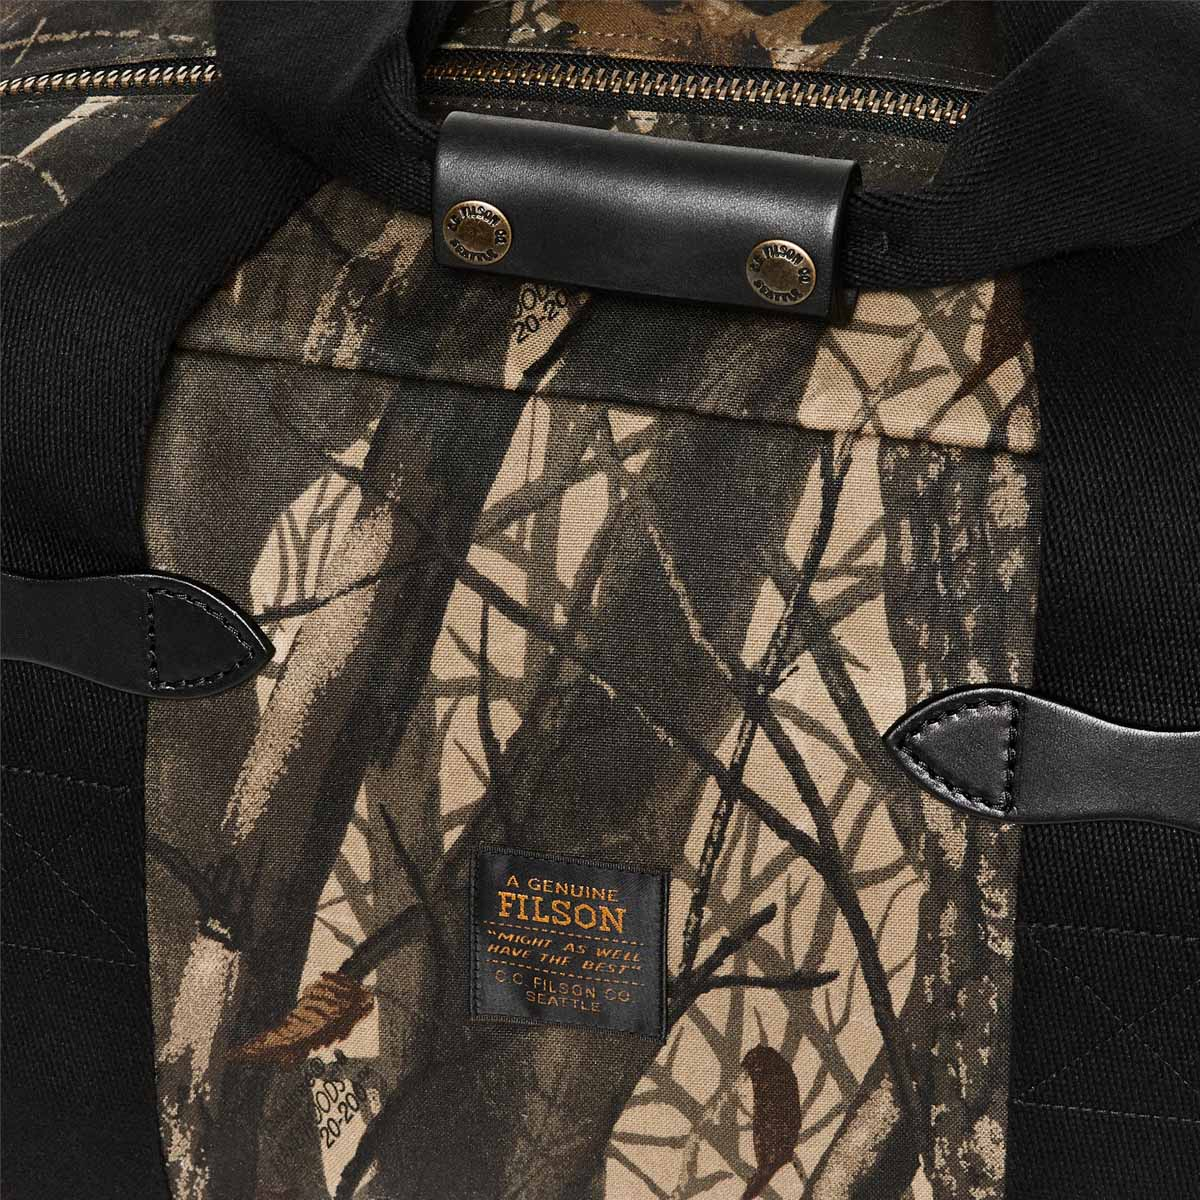 Filson Tin Cloth Small Duffle Bag Realtree Hardwoods Camo, a compact waxed-cotton duffle sized for overnight trips